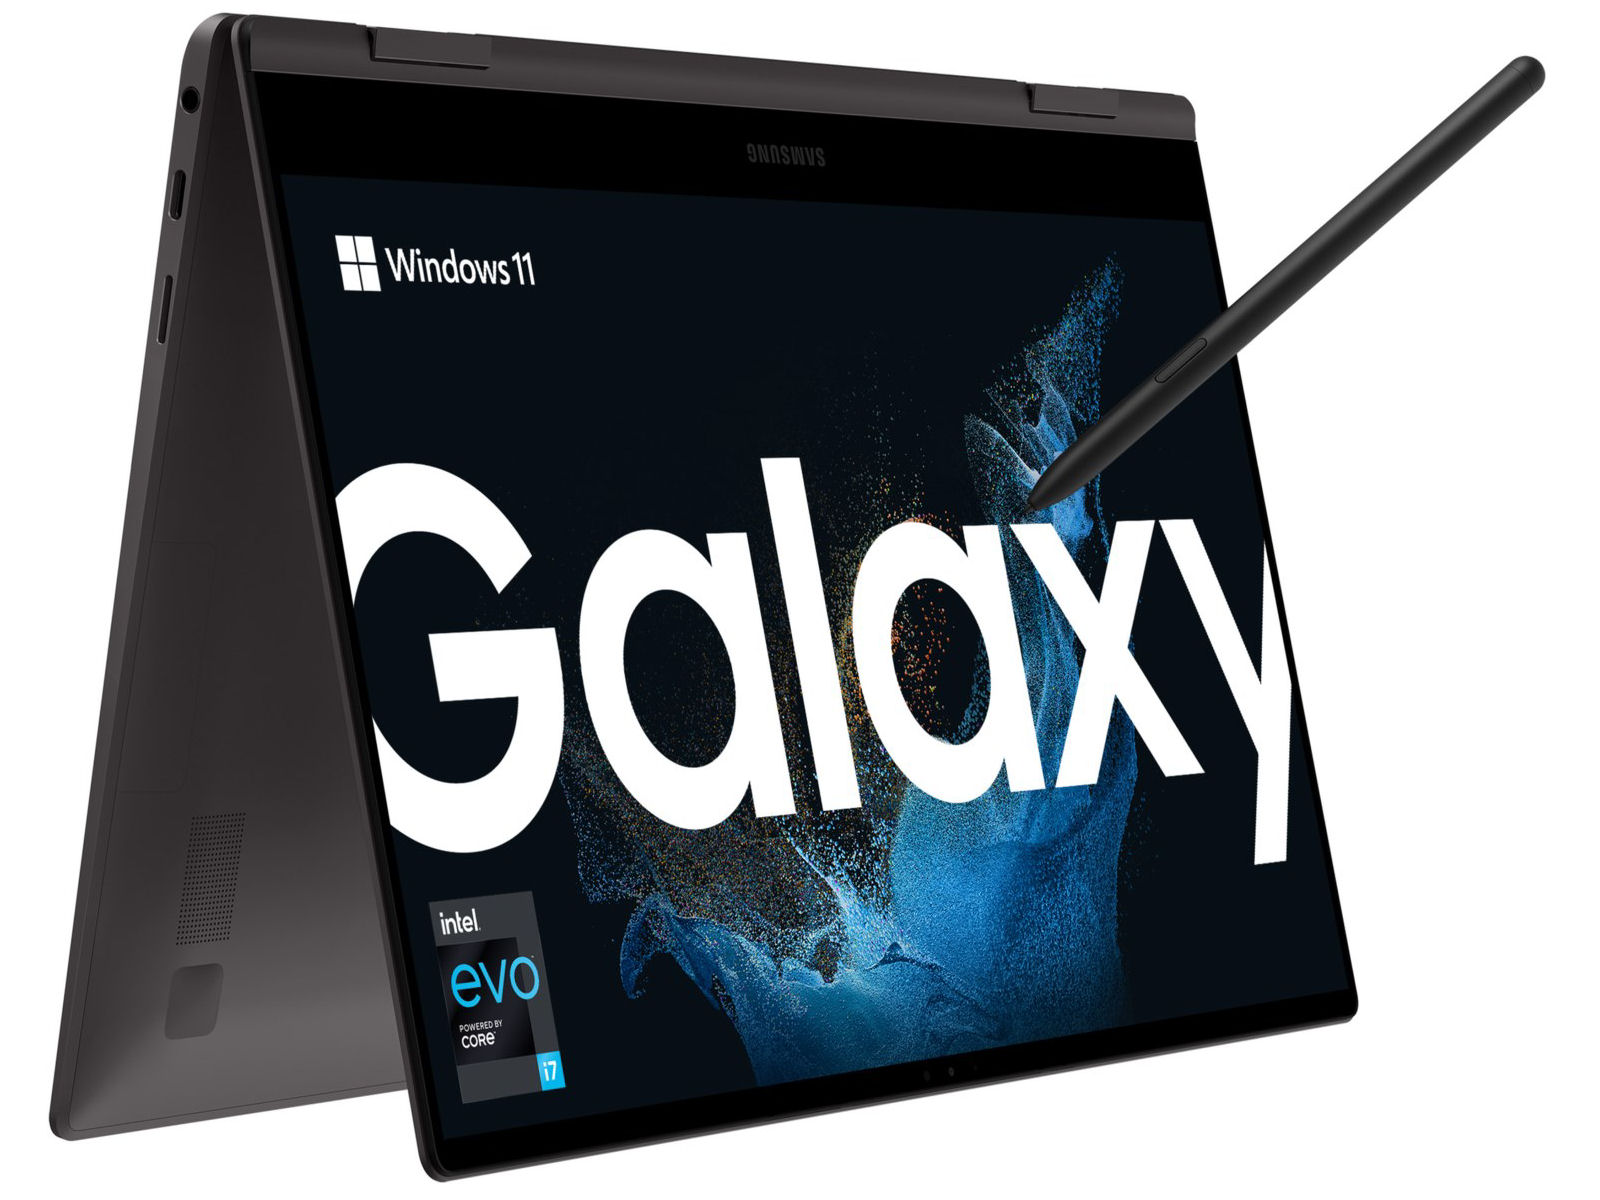 Samsung Unveils Galaxy TabPro S, 2-in-1 Tablet with Windows 10